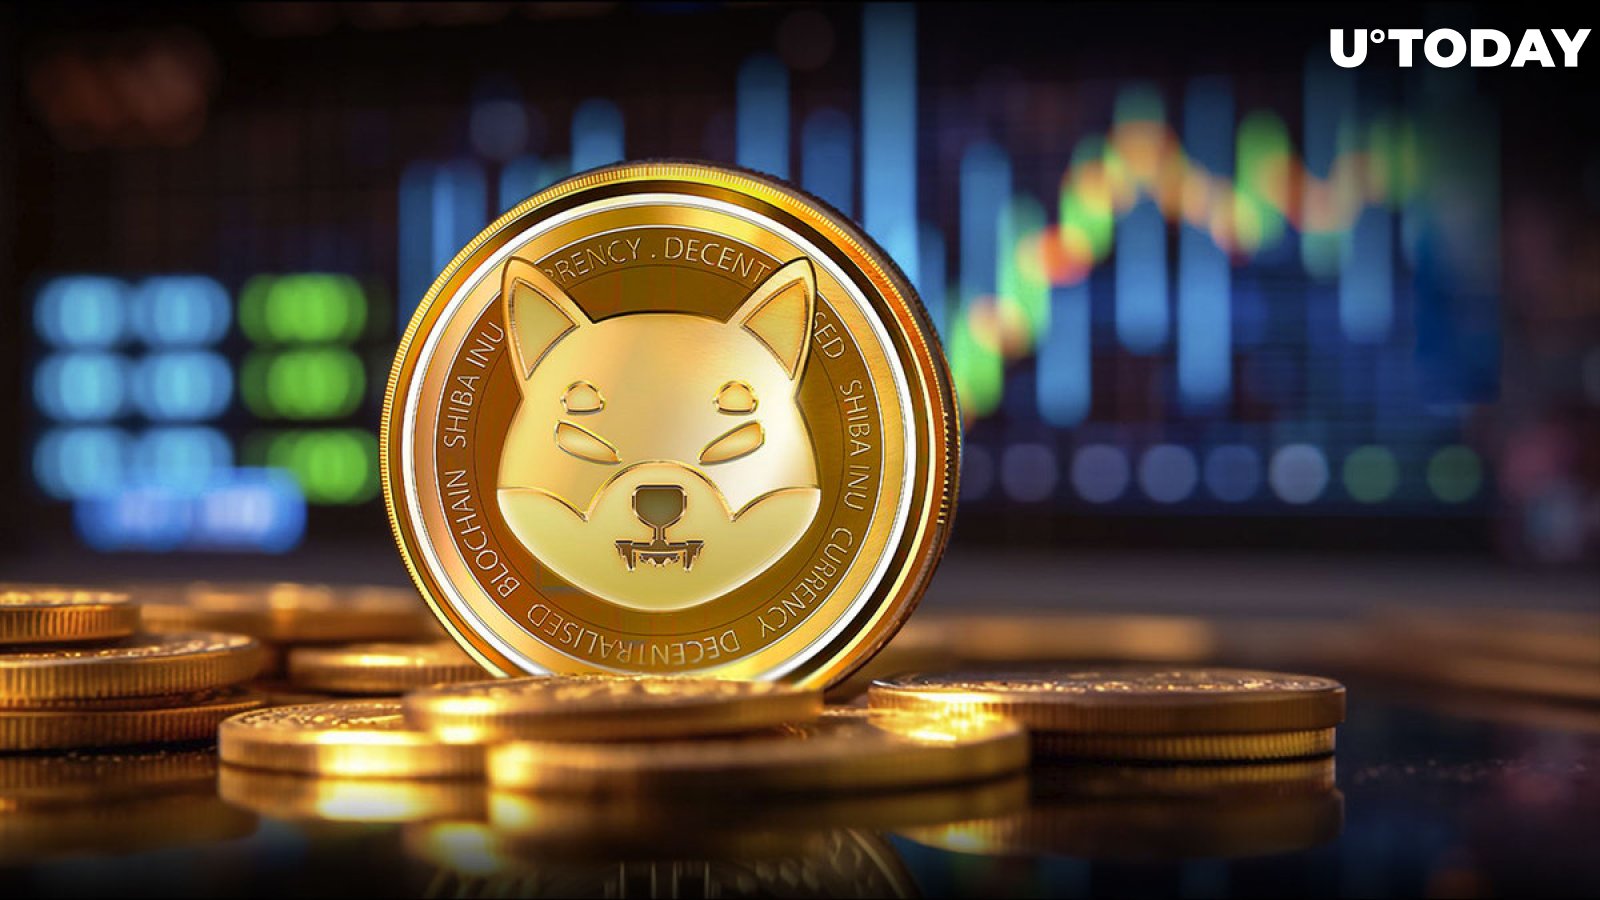 Shiba Inu Soars 700% as Whales Flood Market with More Entries